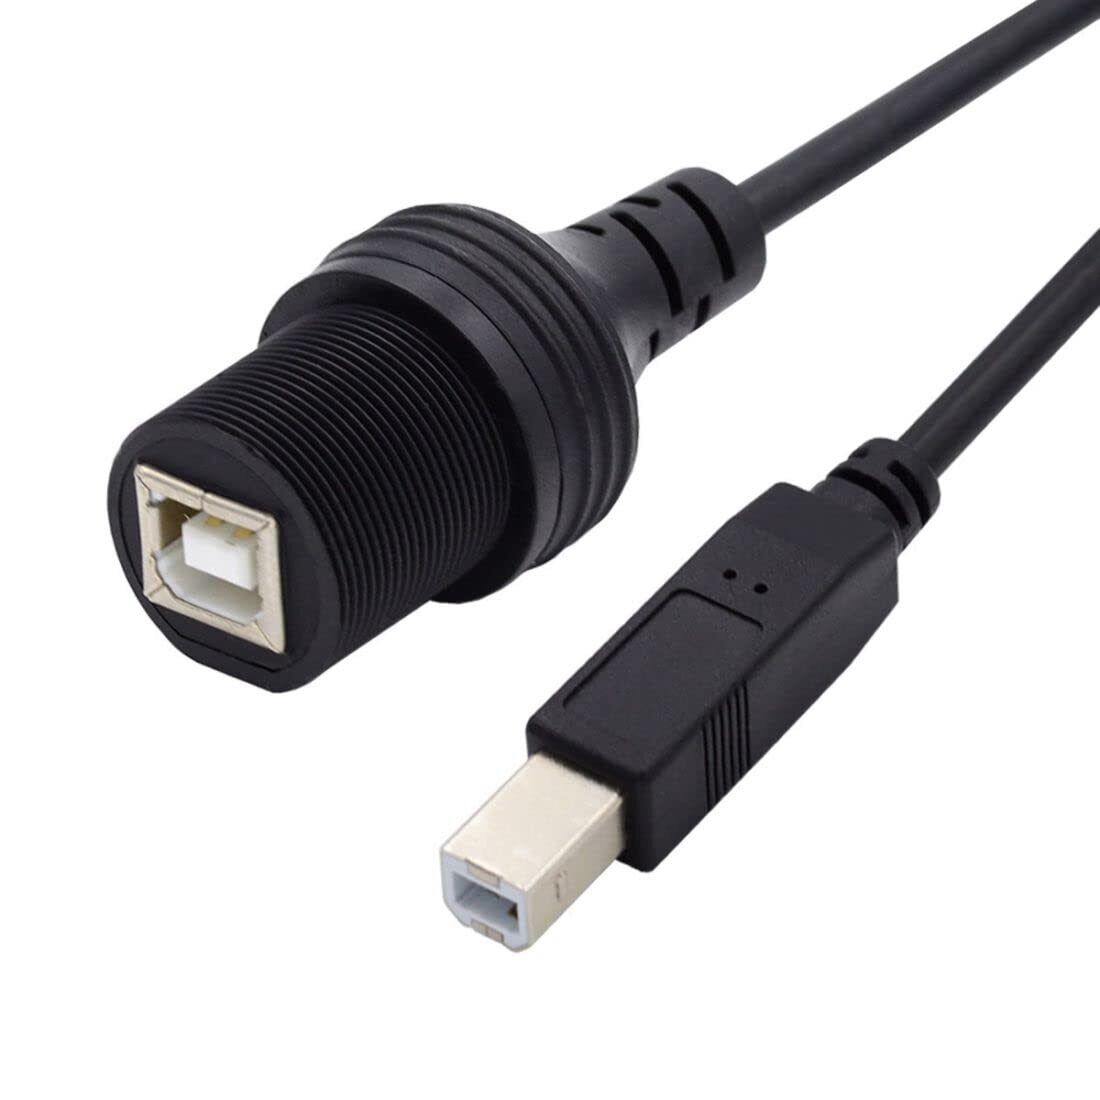 CY Printer Scanner Waterproof Cable,USB 2.0 Type B Male to Female Extension D...